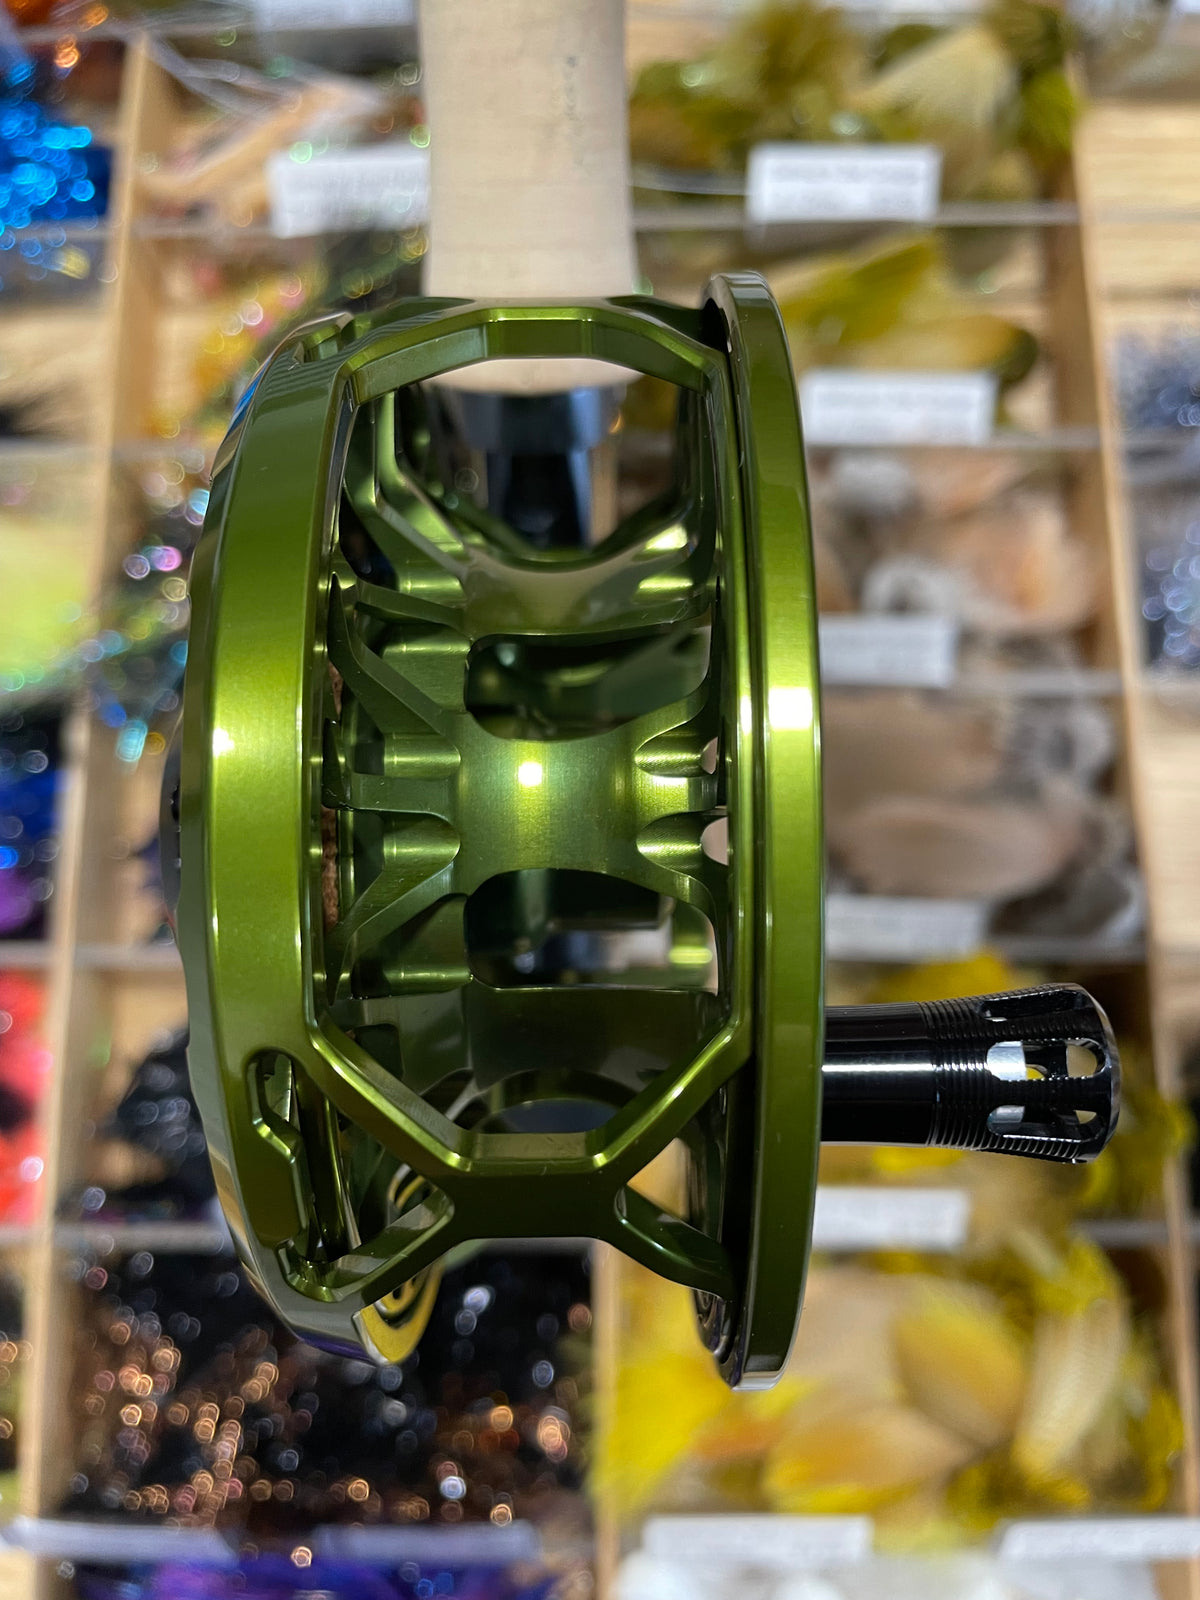 Abel Rove Fly Reel  Motor City Anglers